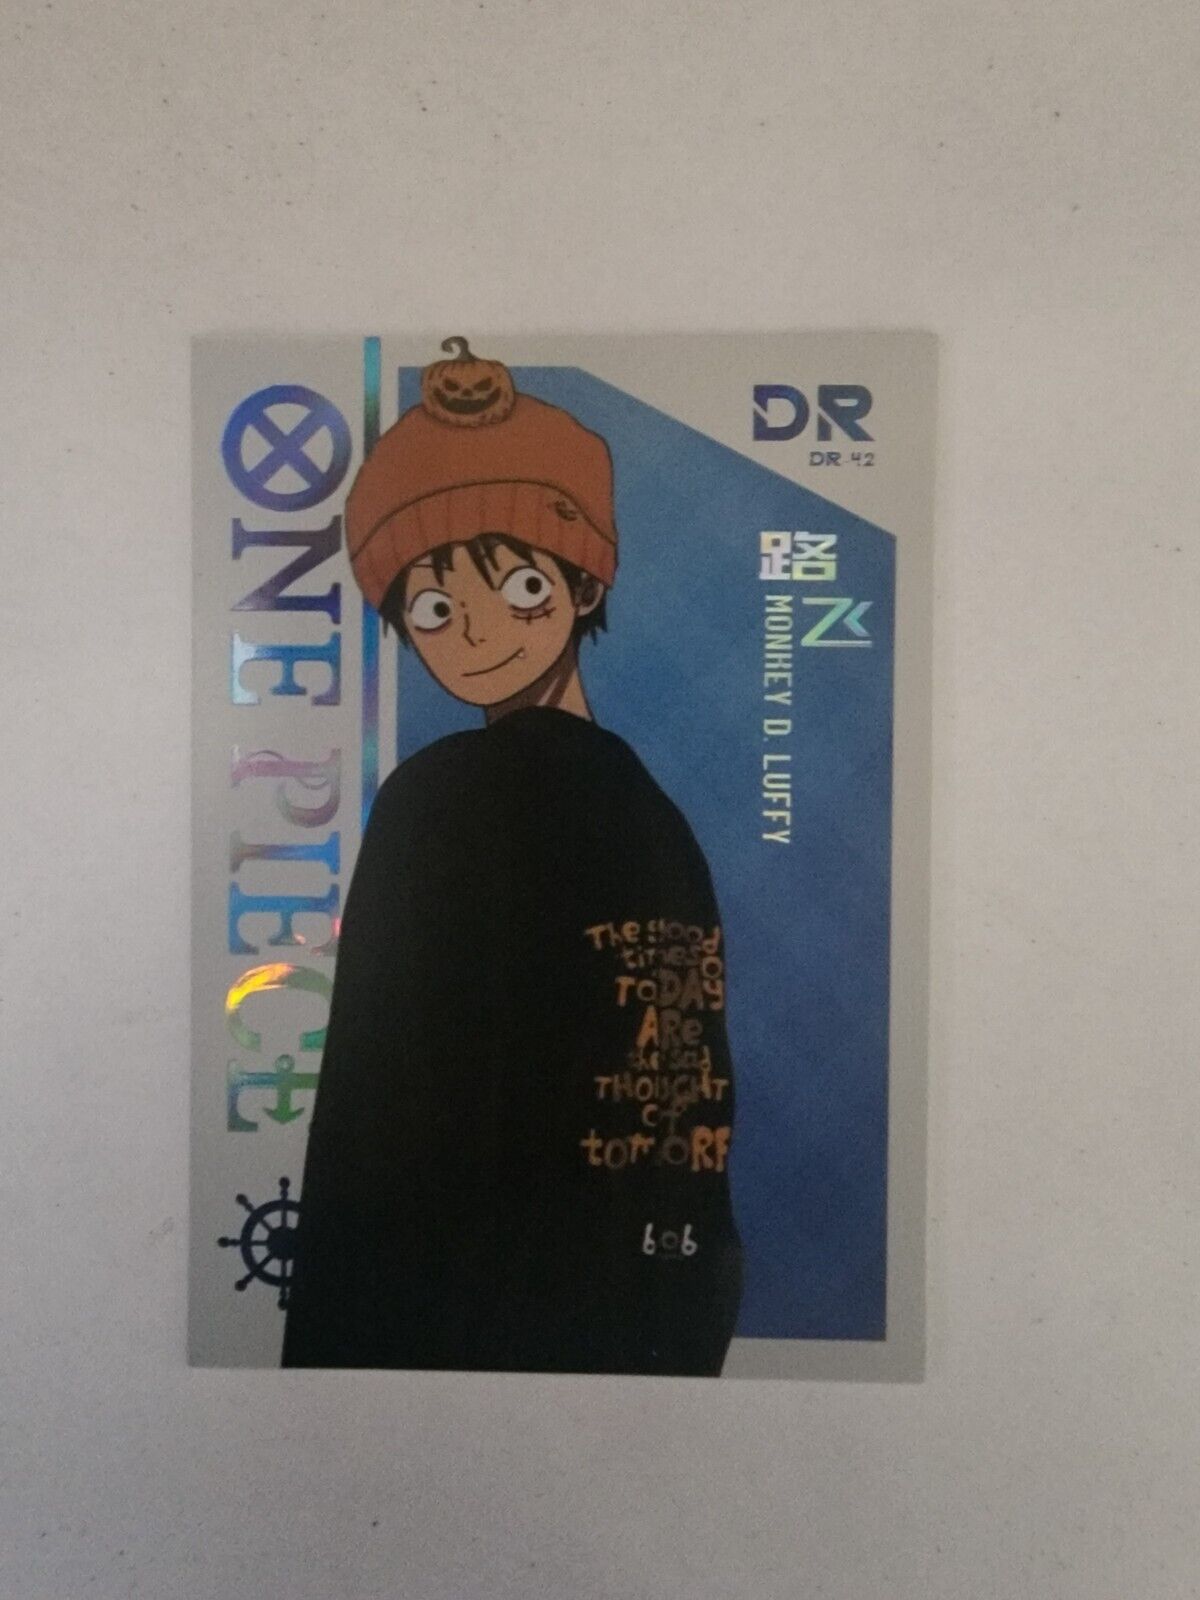 One Piece Collectible Anime Card - DR-42 MONKEY D. LUFFY